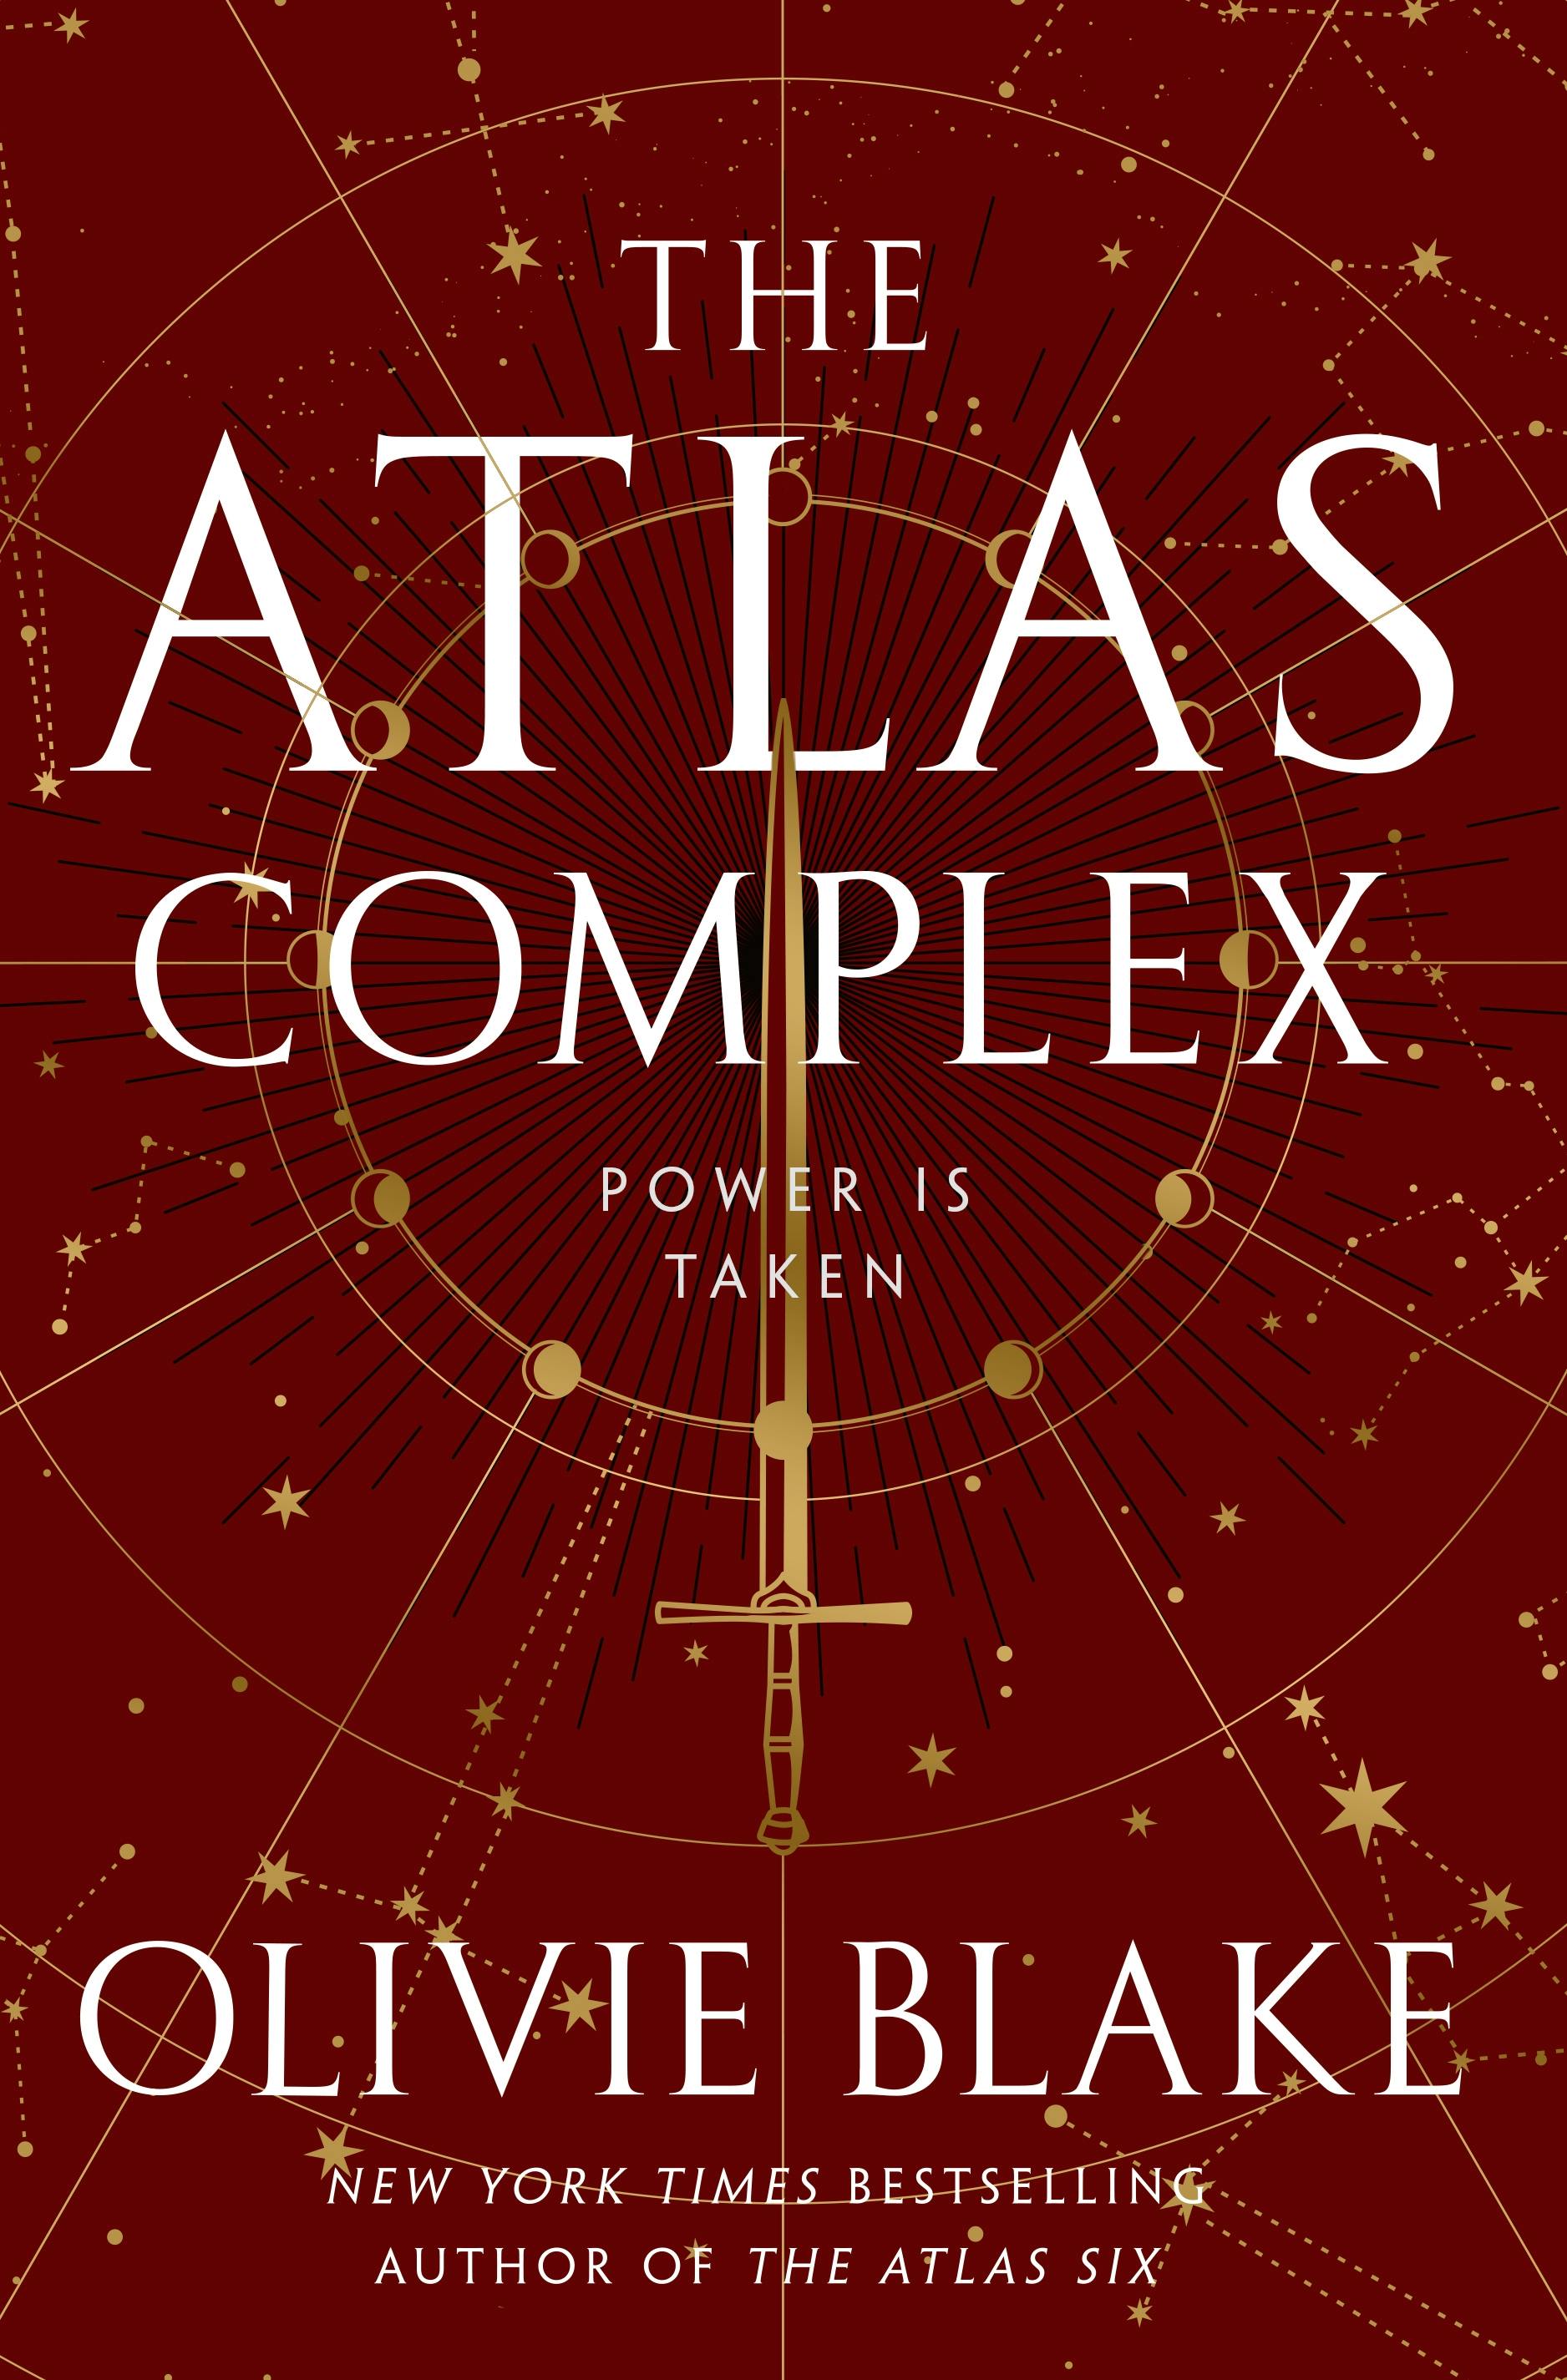 Cover for the book titled as: The Atlas Complex